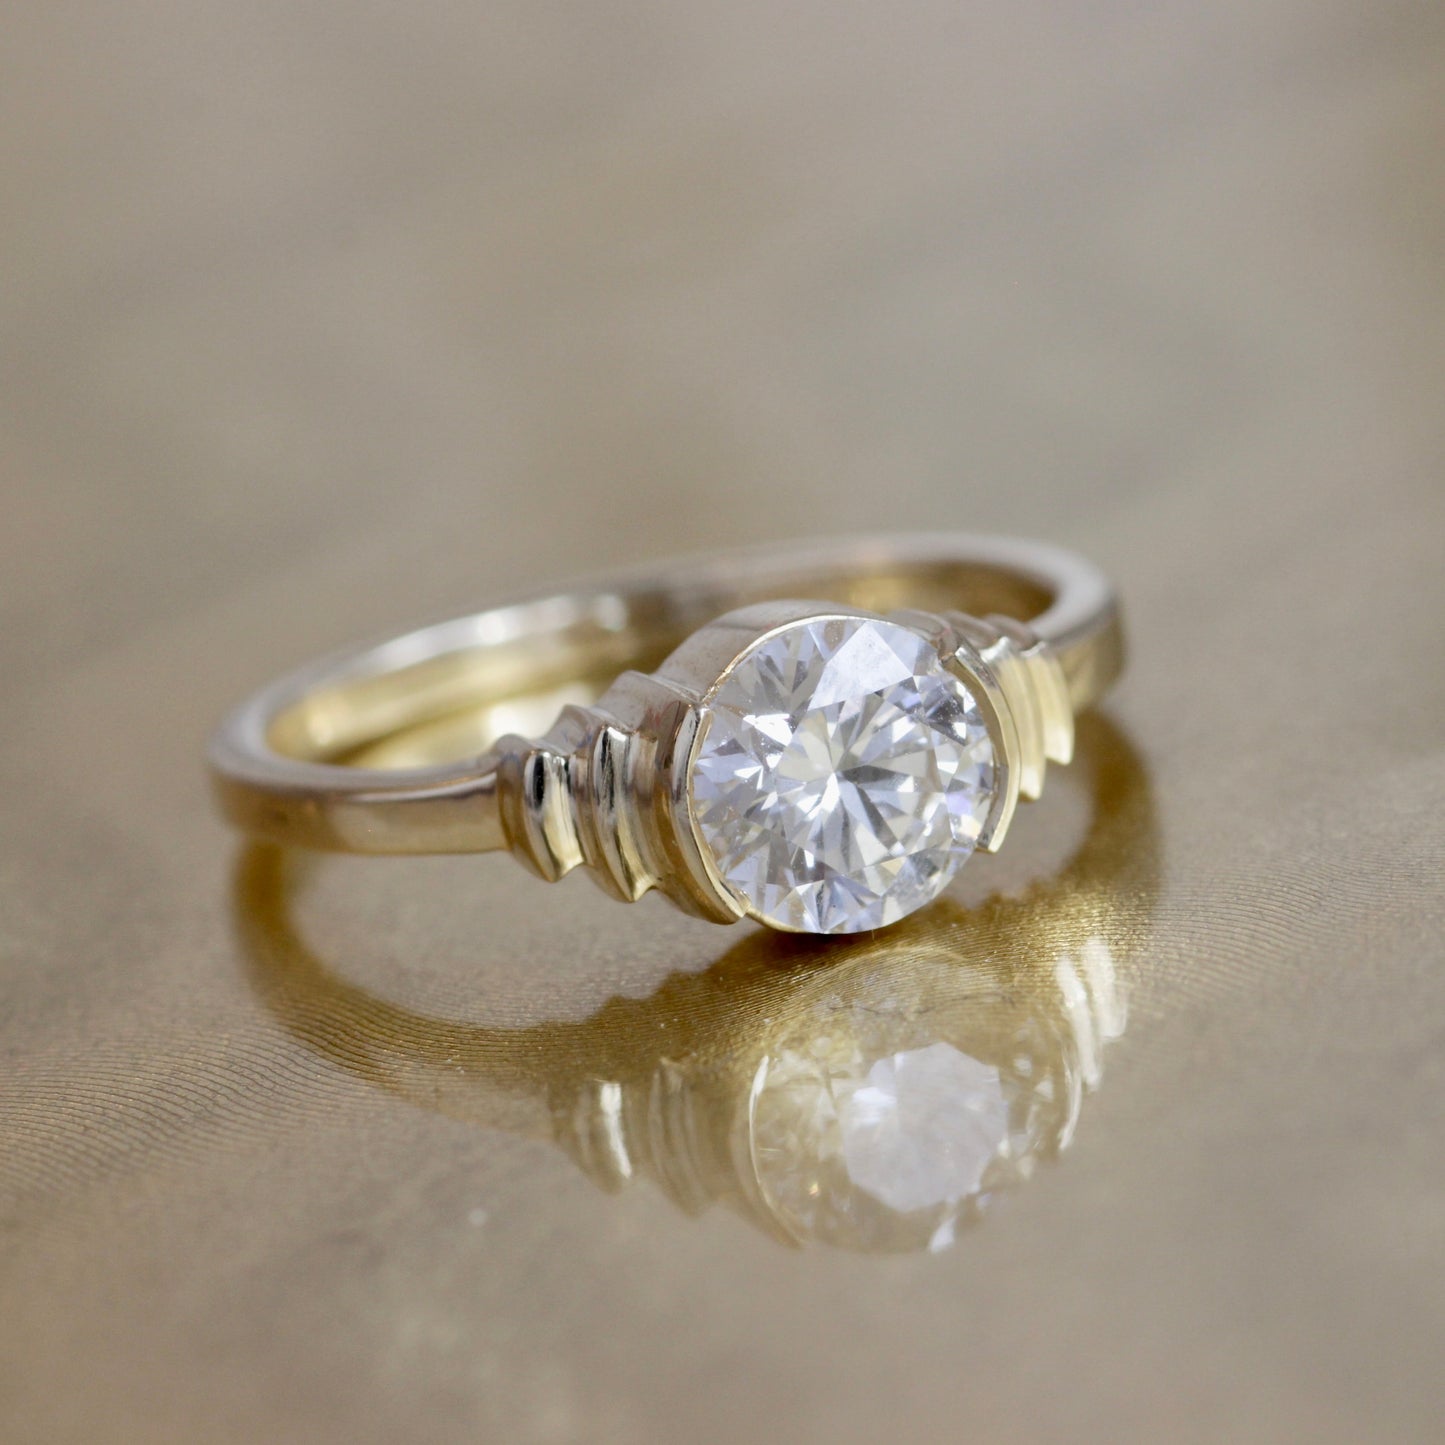 Load image into Gallery viewer, Step Ring / Lab Round Diamonds 1.10ct - Goldpoint Studio - Greenpoint, Brooklyn - Fine Jewelry
